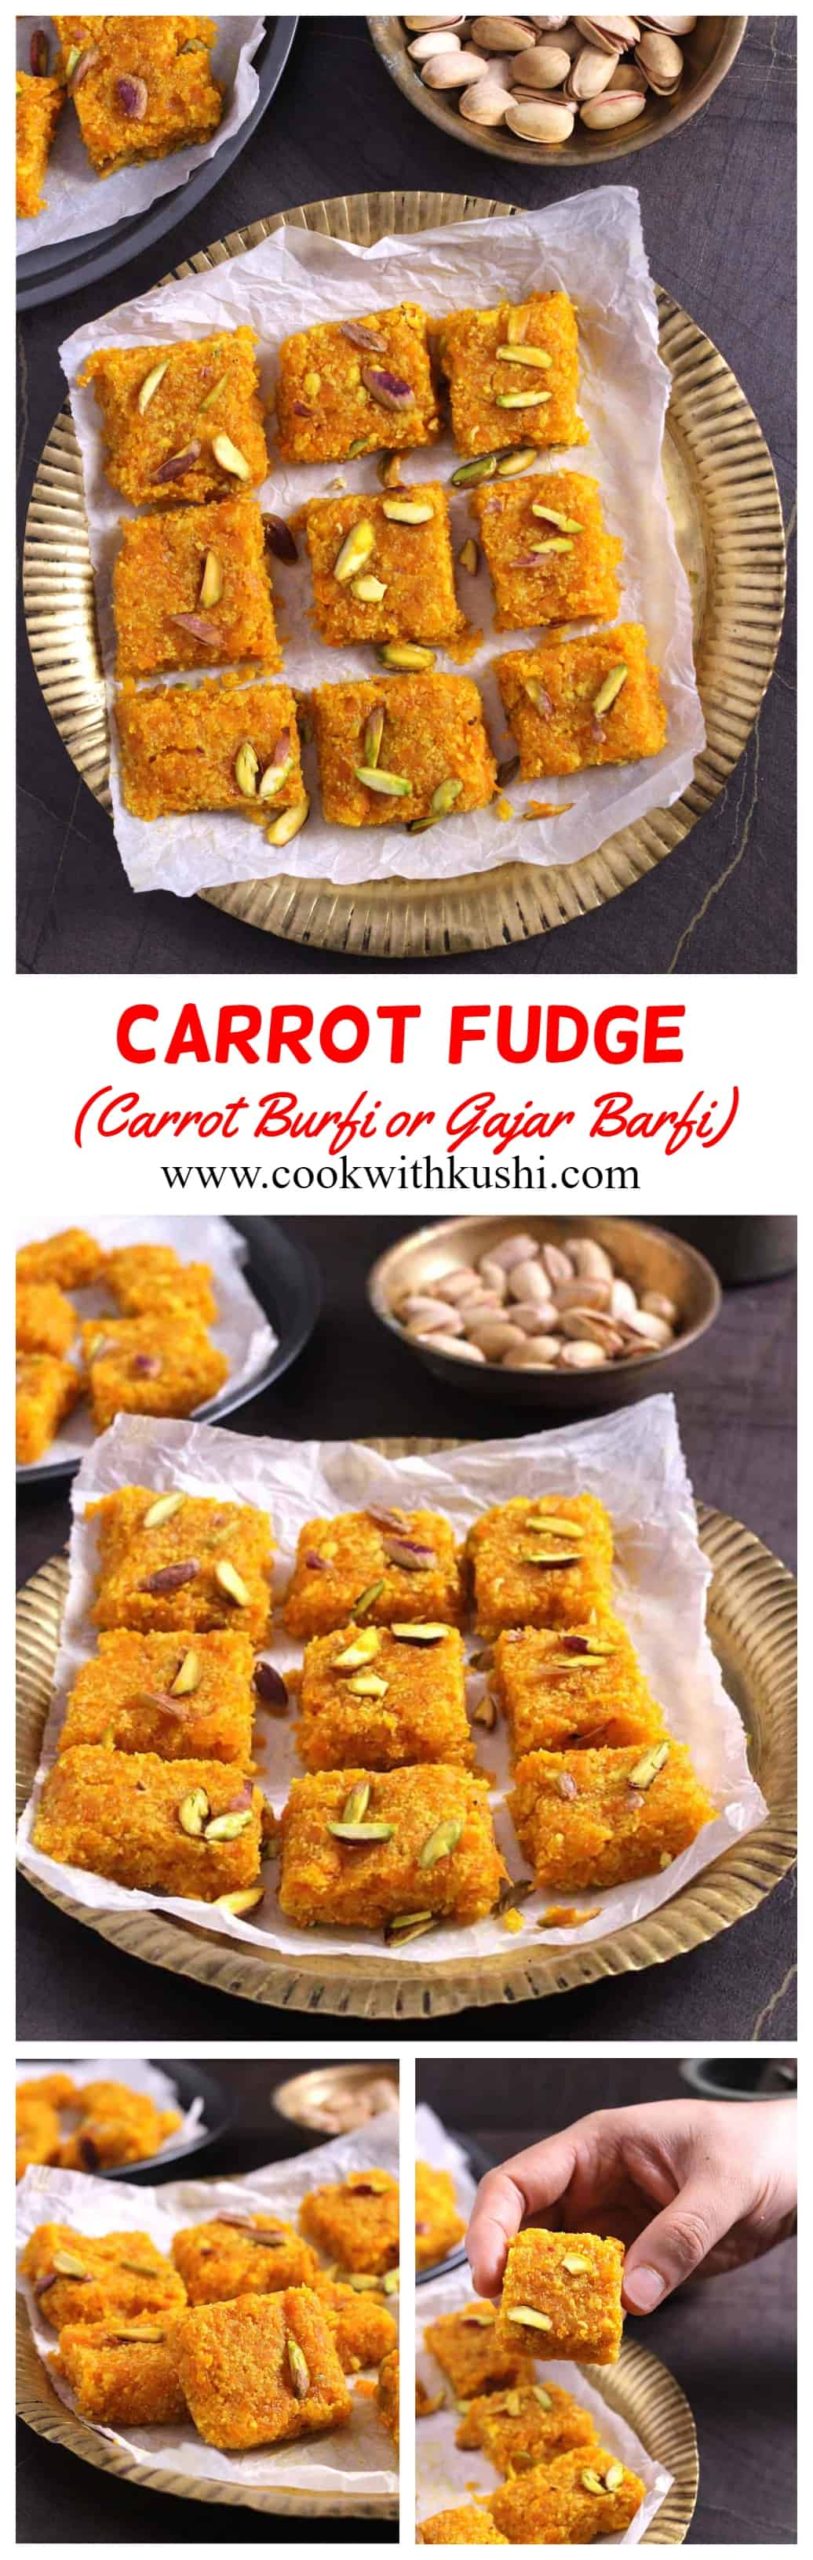 Carrot Burfi or Gajar Ki Barfi is a quick and easy to make, soft and melt in mouth Indian sweet or mithai recipe prepared using fresh grated carrots. #burfi #barfi #Indiansweets #indiandesserts #diwali #Mithai #halwa #laddu #Ladoo